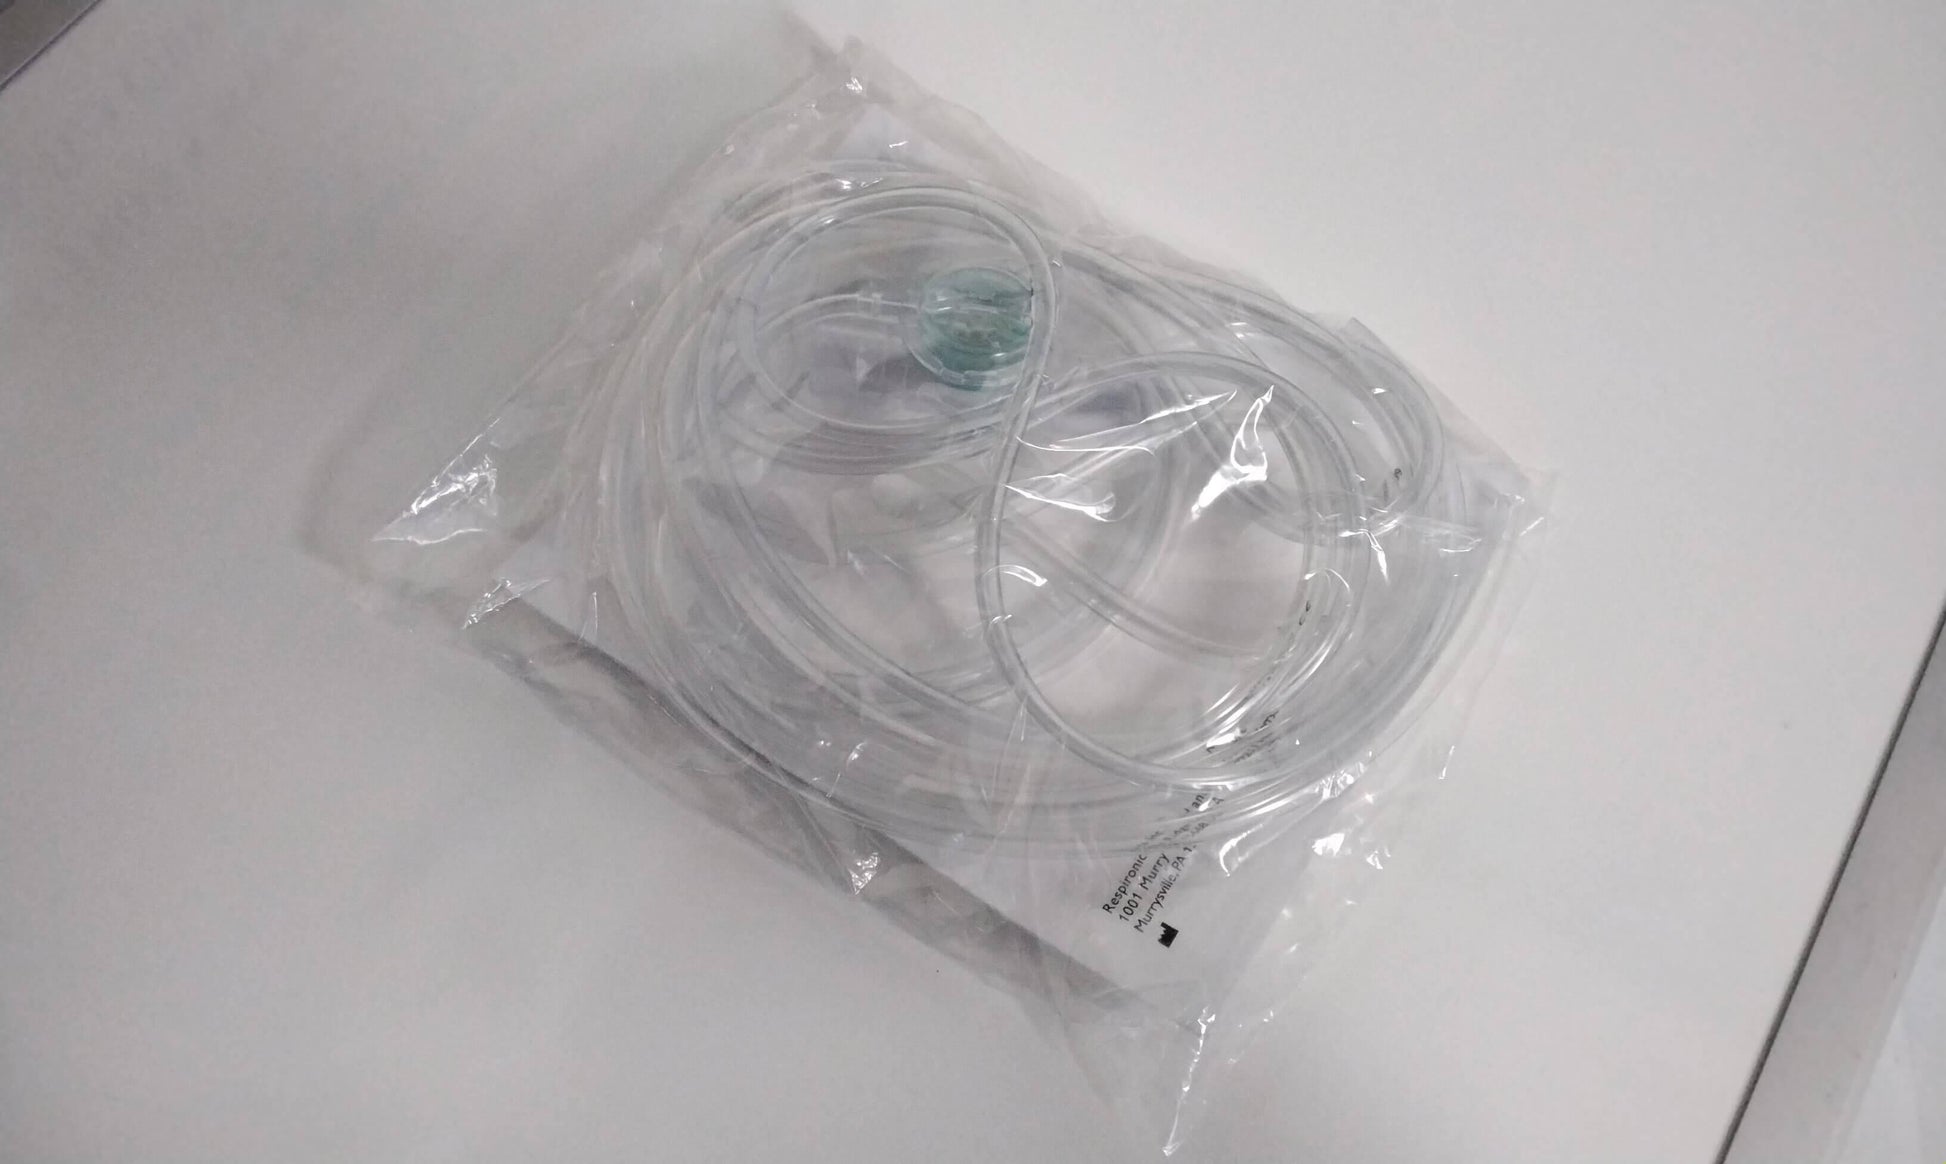 NEW Philips Respironics Active Exhalation Device Kit 1065659 with Free Shipping - MBR Medicals